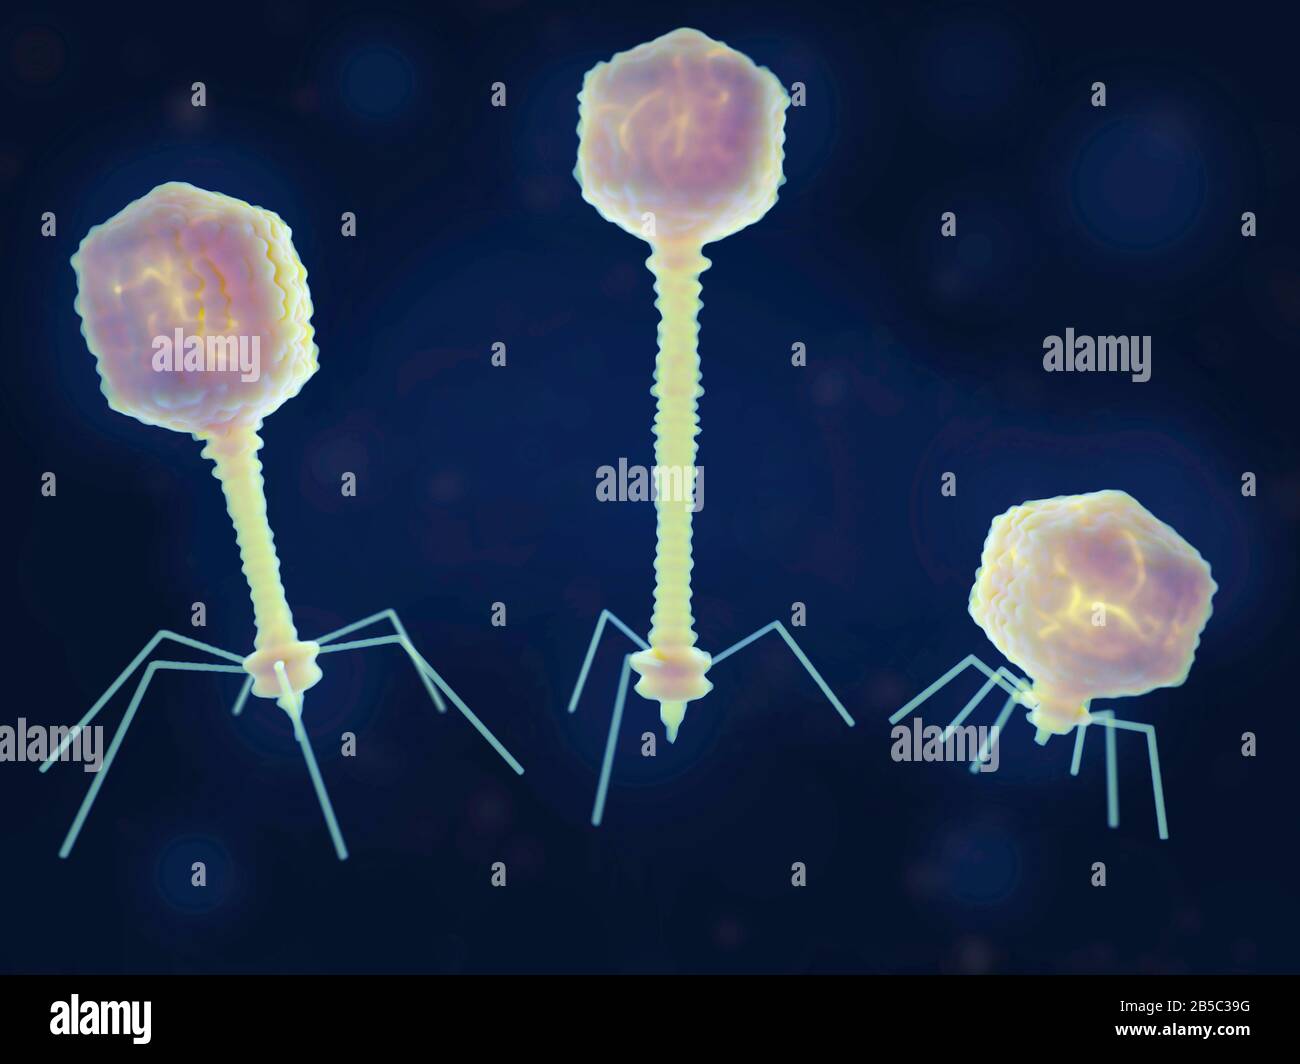 Different bacteriophages, illustration Stock Photo